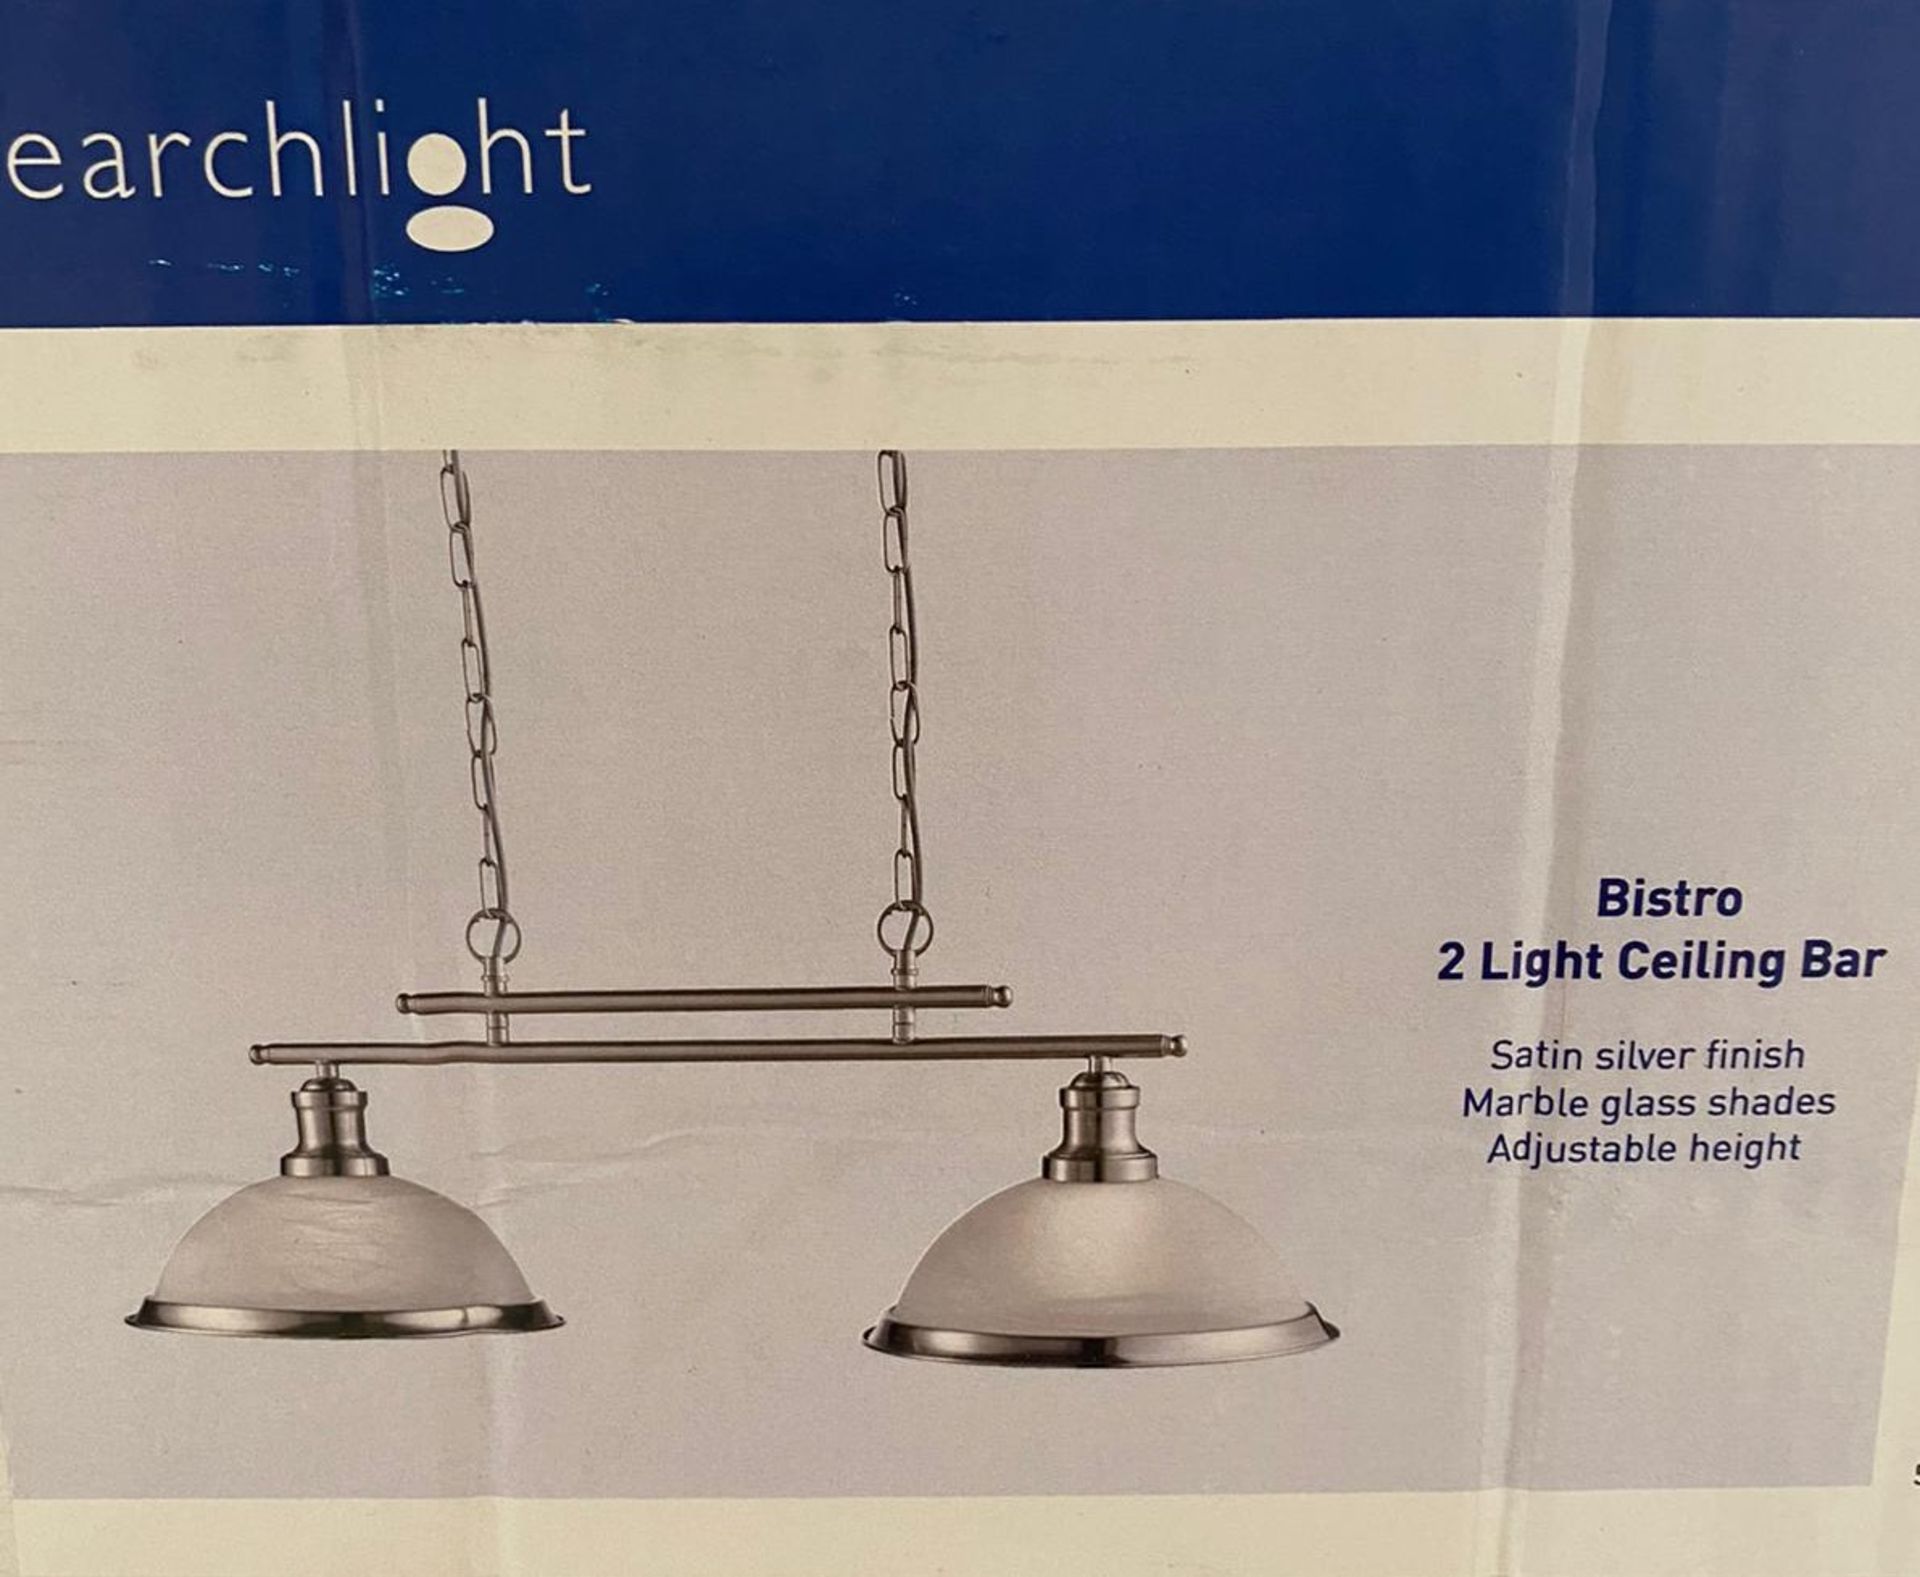 1 x Searchlight bistro 2 Light Ceiling Bar in satin silver - Ref: 2682-2SS - New Boxed - RRP: £115 - Image 3 of 3